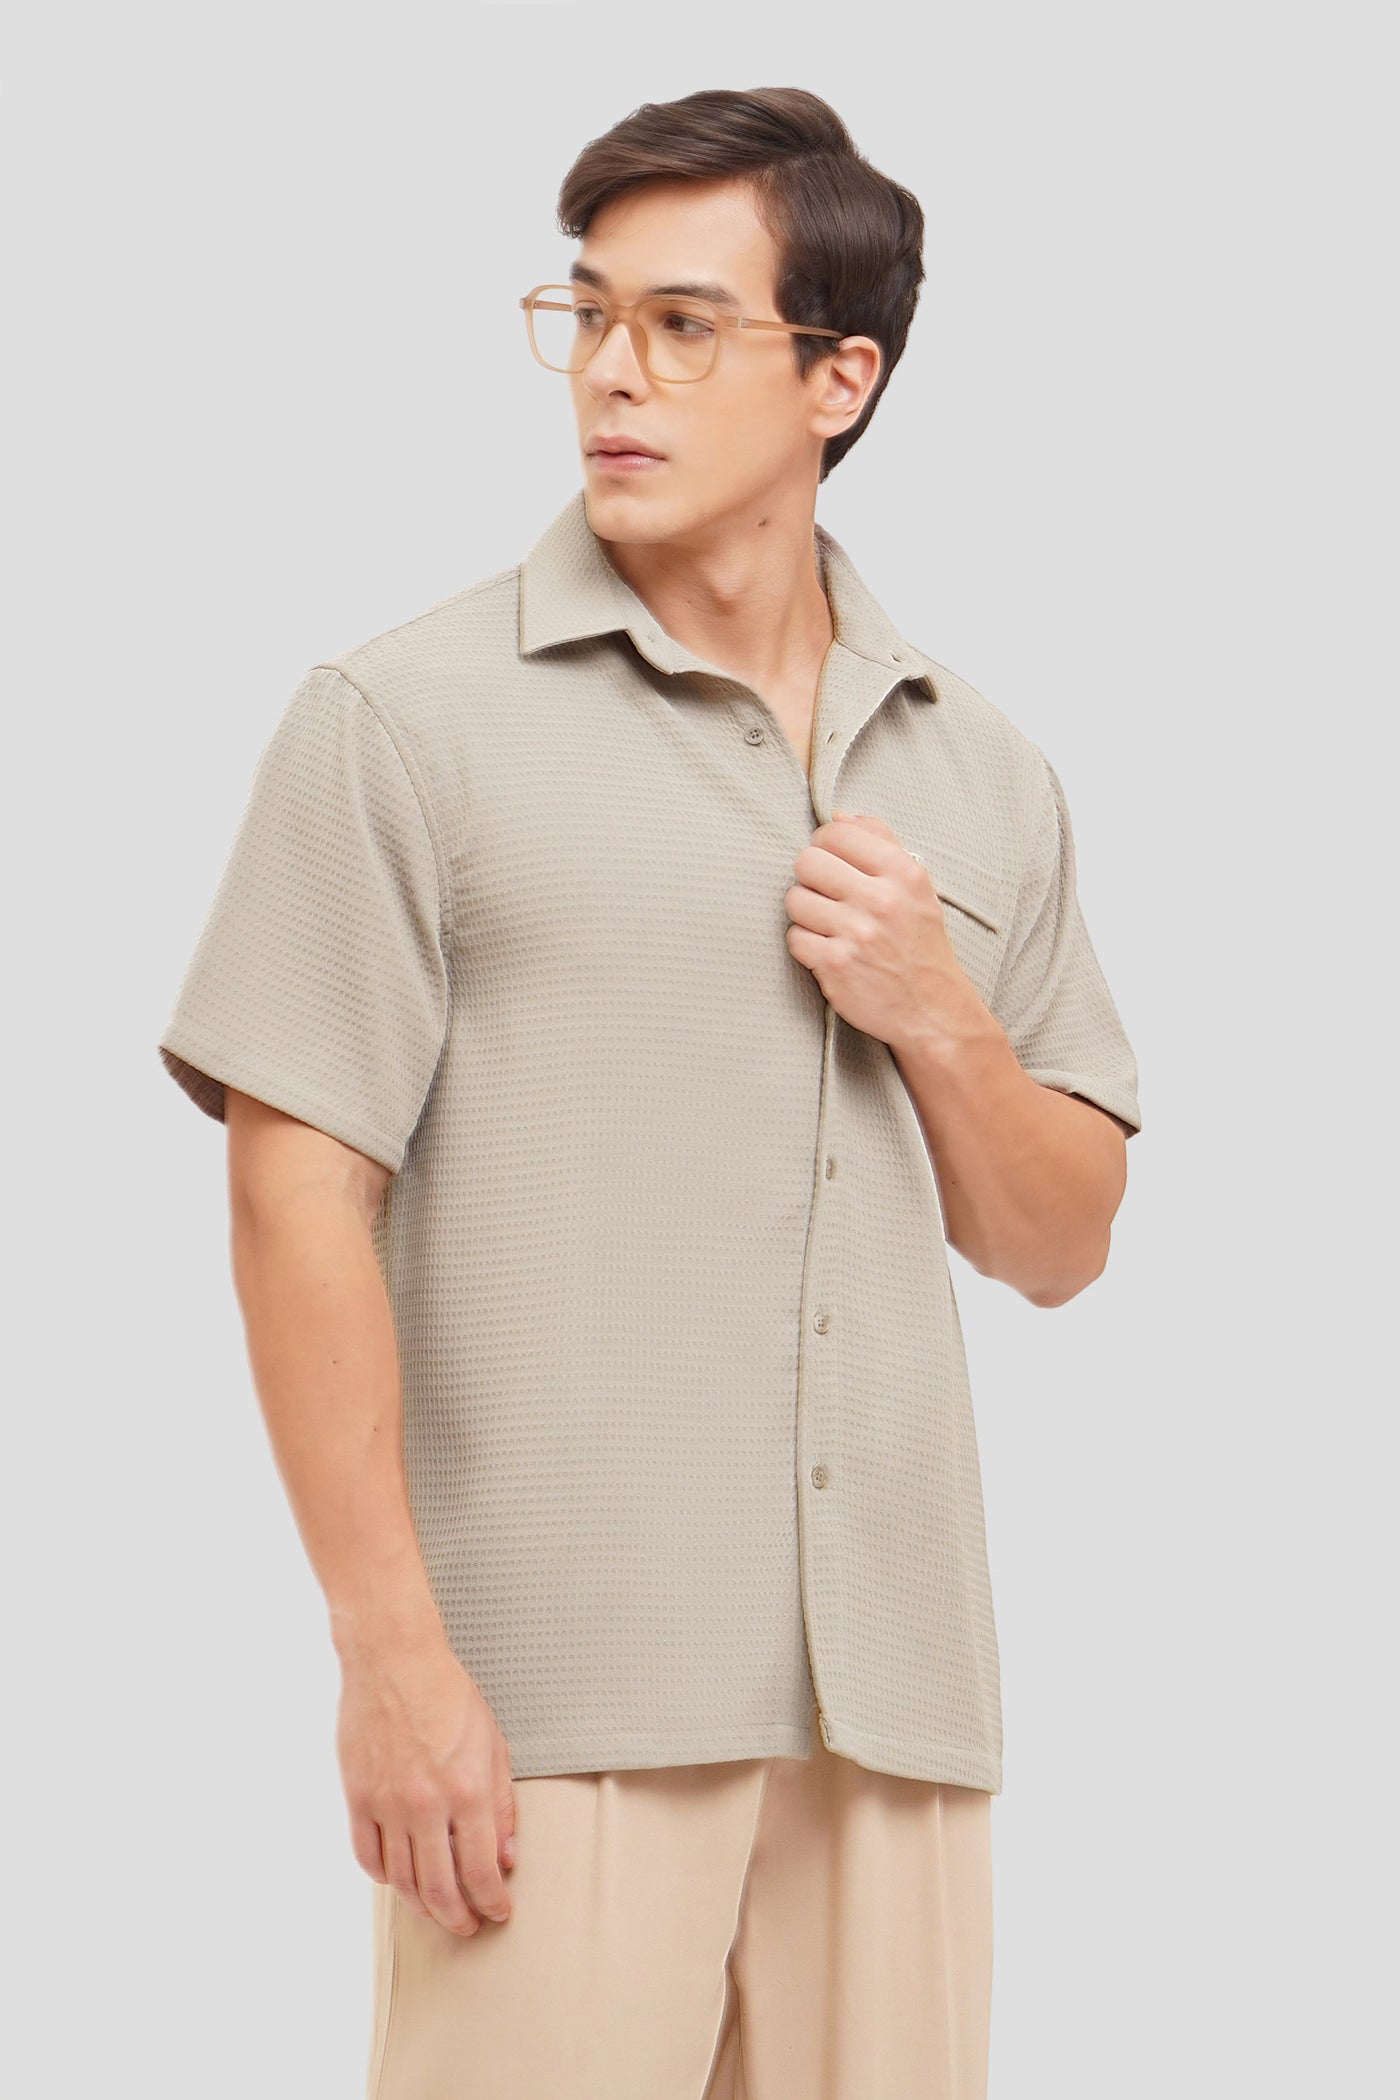 Textured Button Up Shirt With Pocket